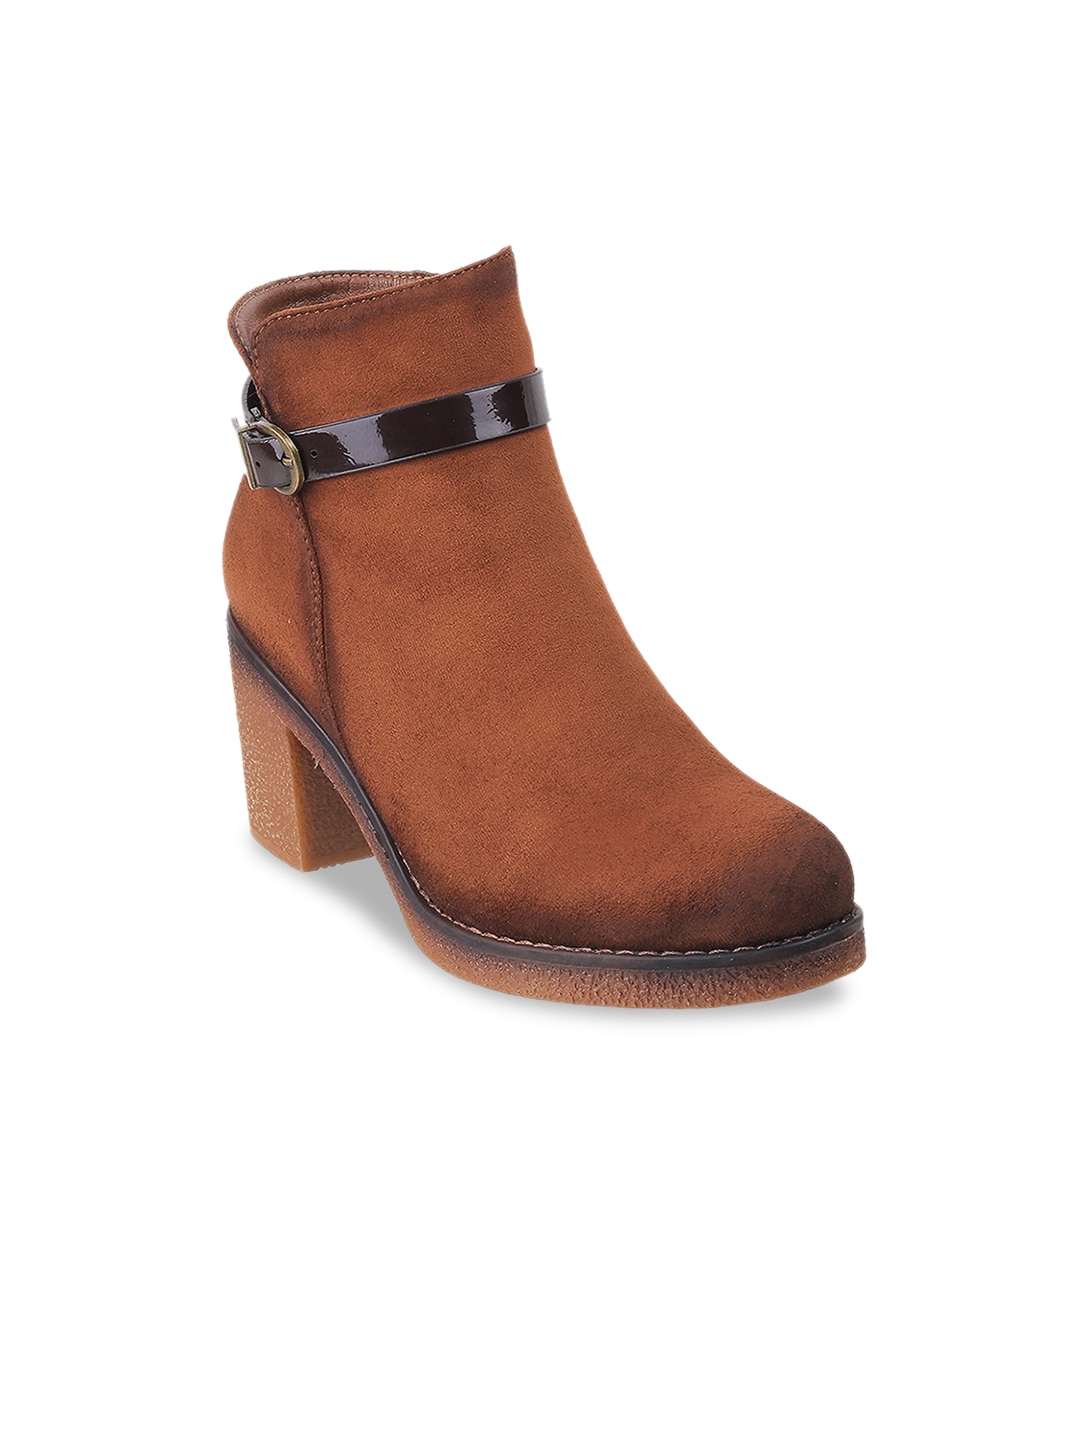 Mochi Brown Block Heeled Boots Price in India